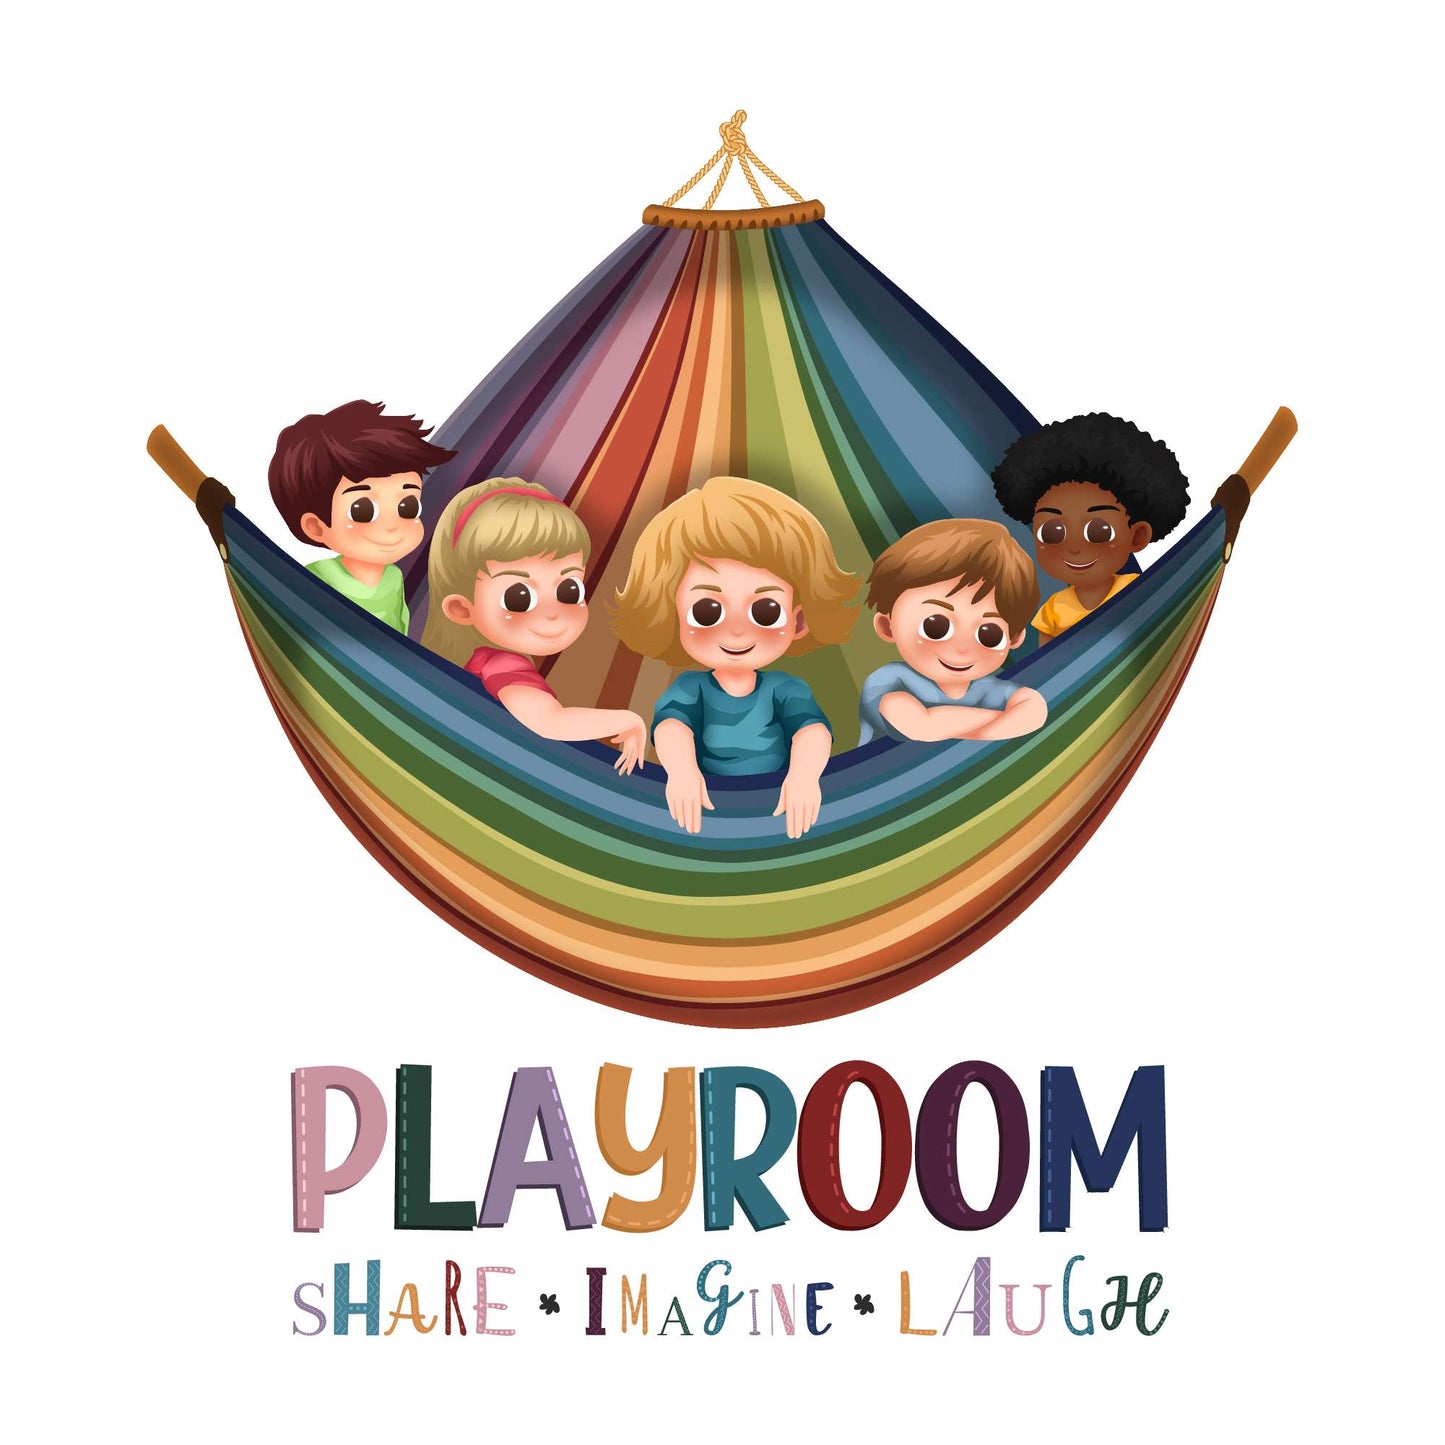 Design With Vinyl Playful Rainbow Wall Decal Playroom Share Imagine Laugh Cute Kids Swinging In A Rainbow Kids Wall Design